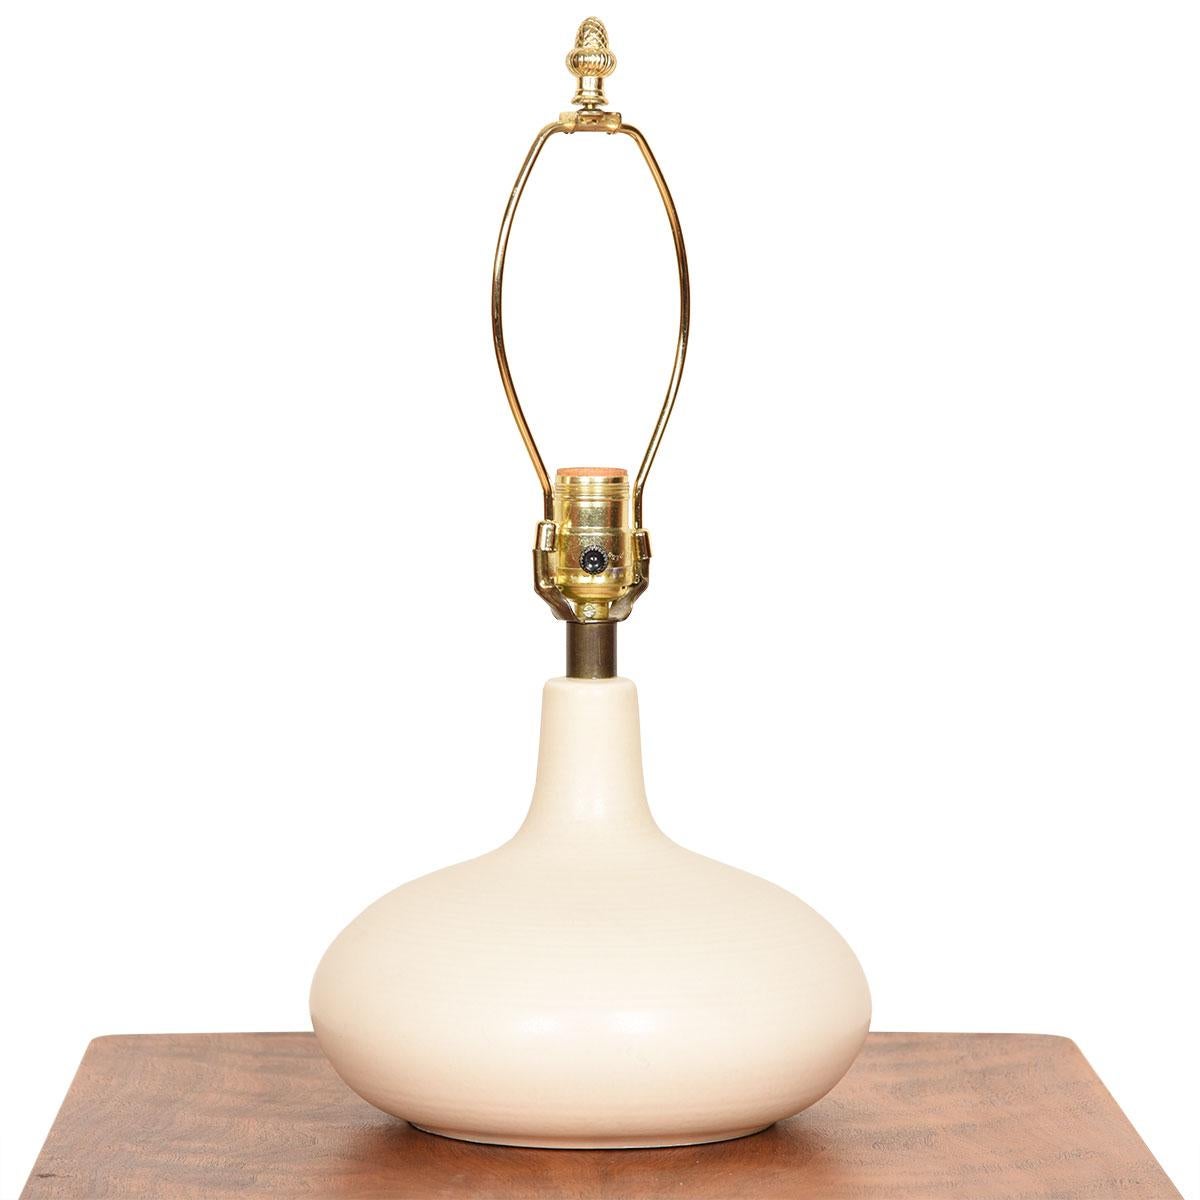 Small Round Bostlund Table Lamp by Lotte & Gunnar Bostlund

Additional information:
Material: Pottery
Featured at DC
Matte-glazed pottery table lamp by Lotte & Gunnar Bostlund for Bostlund Industries Inc.

Dimension: Ø 9.5? x H 11?